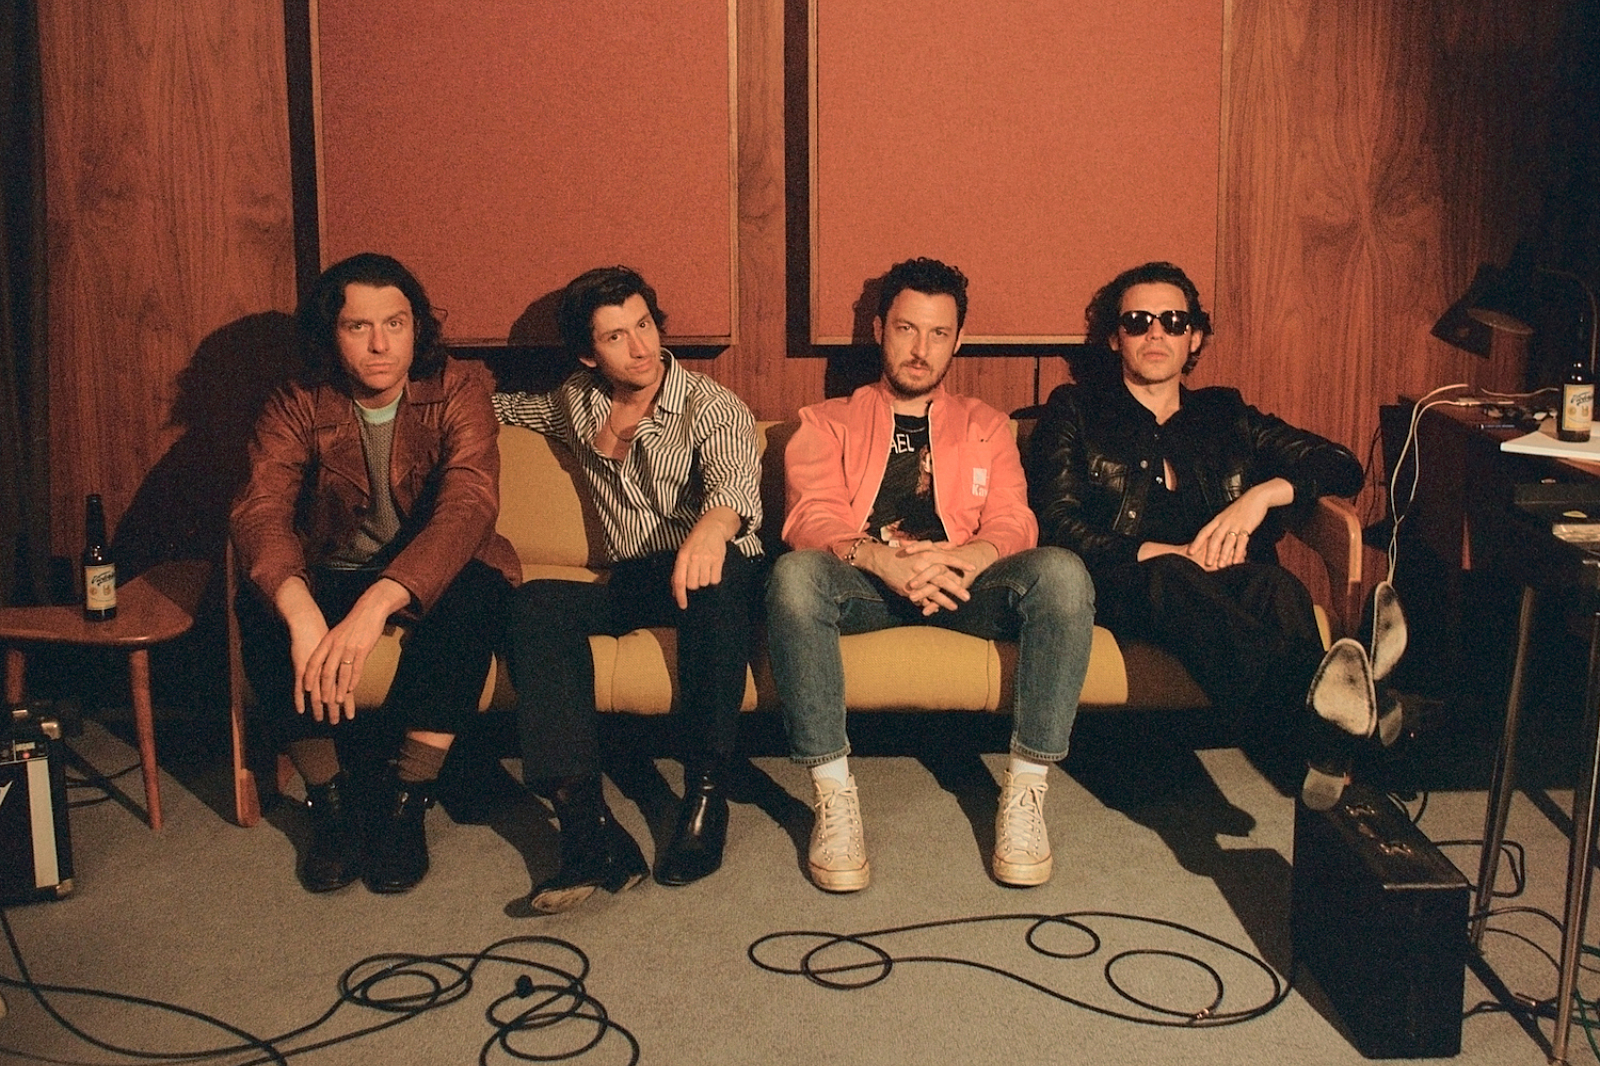 Arctic Monkeys release new track 'There'd Better Be A Mirrorball'